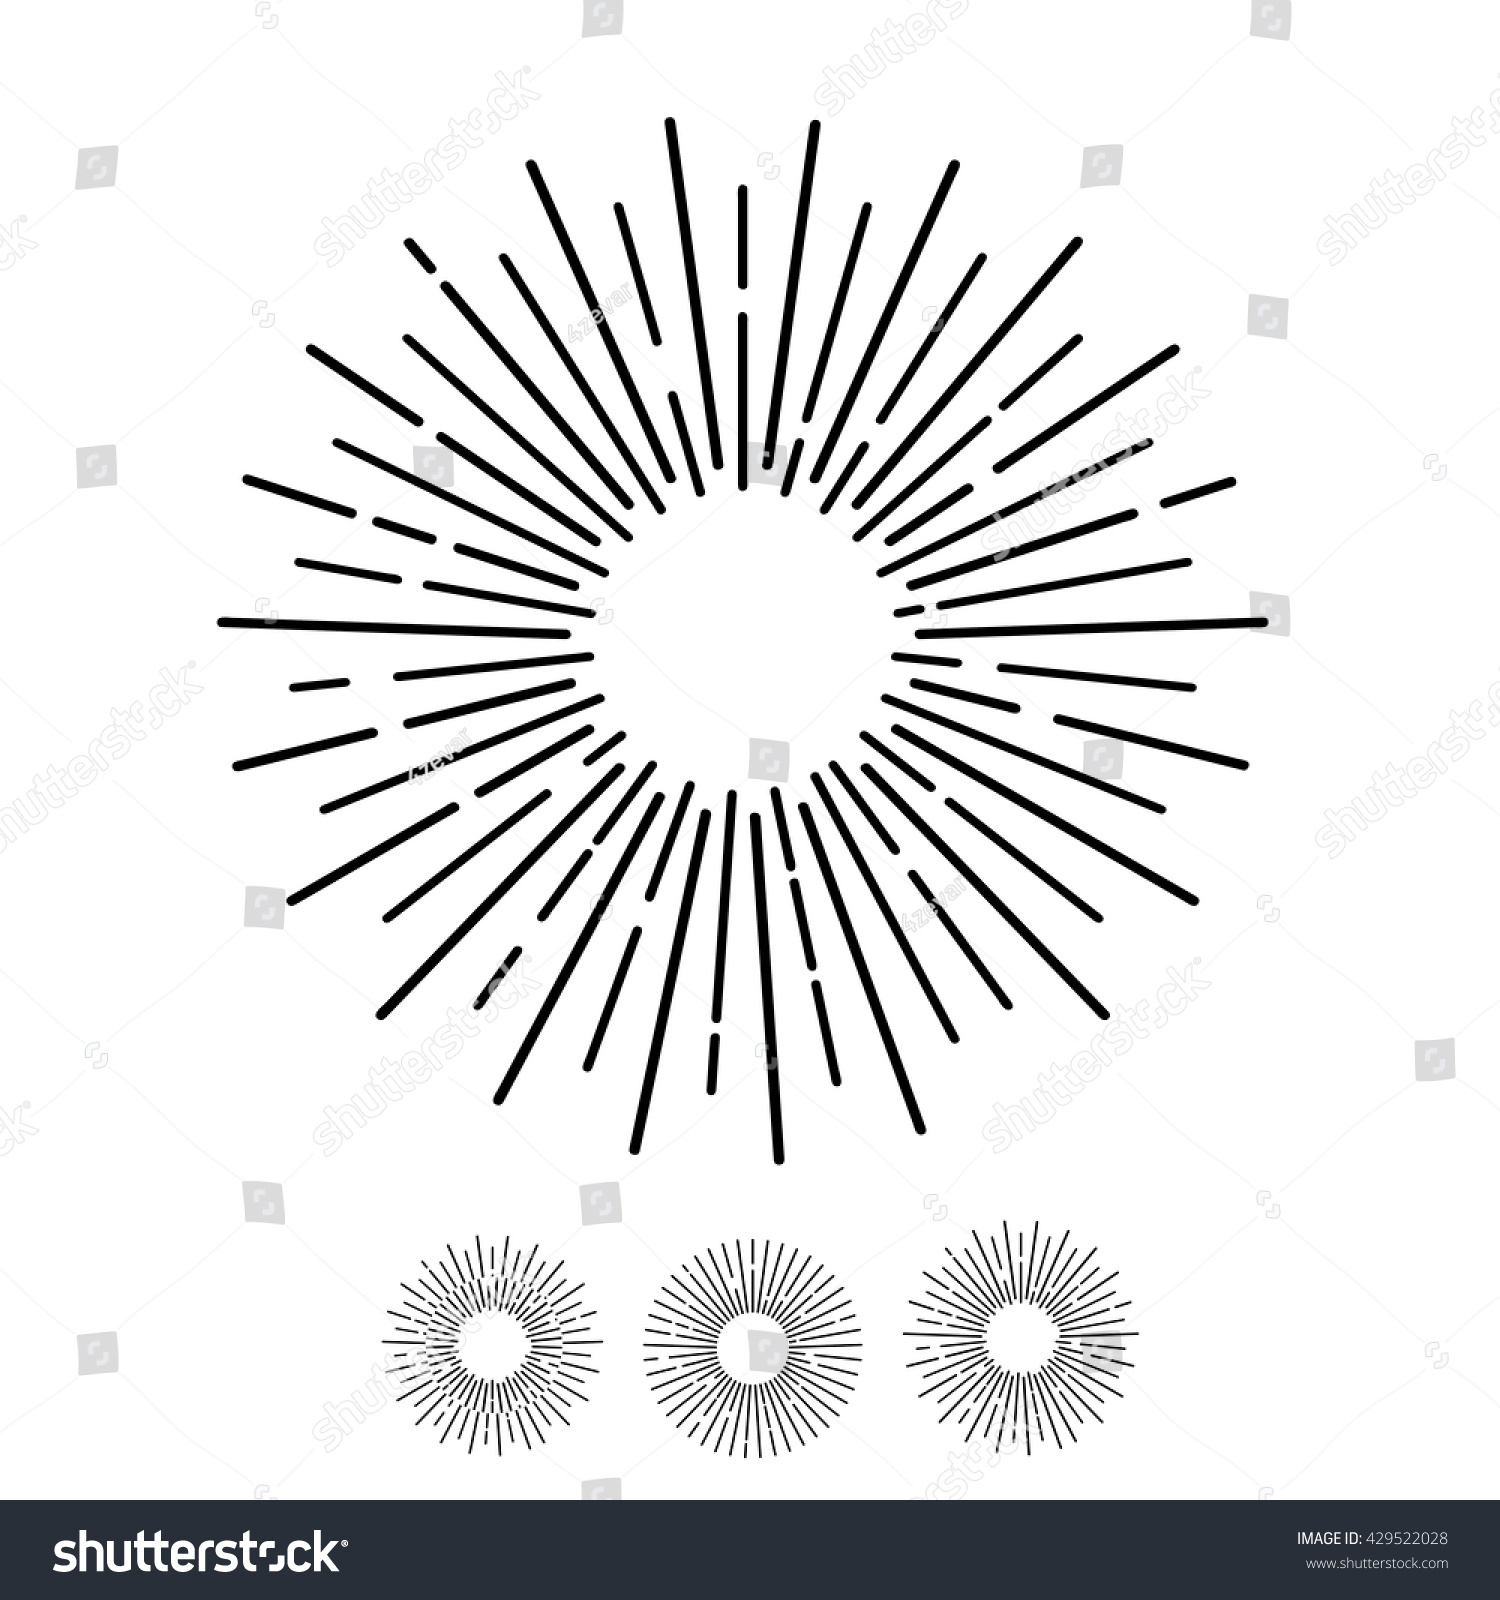 Sun Rays Hand Drawn Linear Drawing Stock Vector 429522028 - Shutterstock